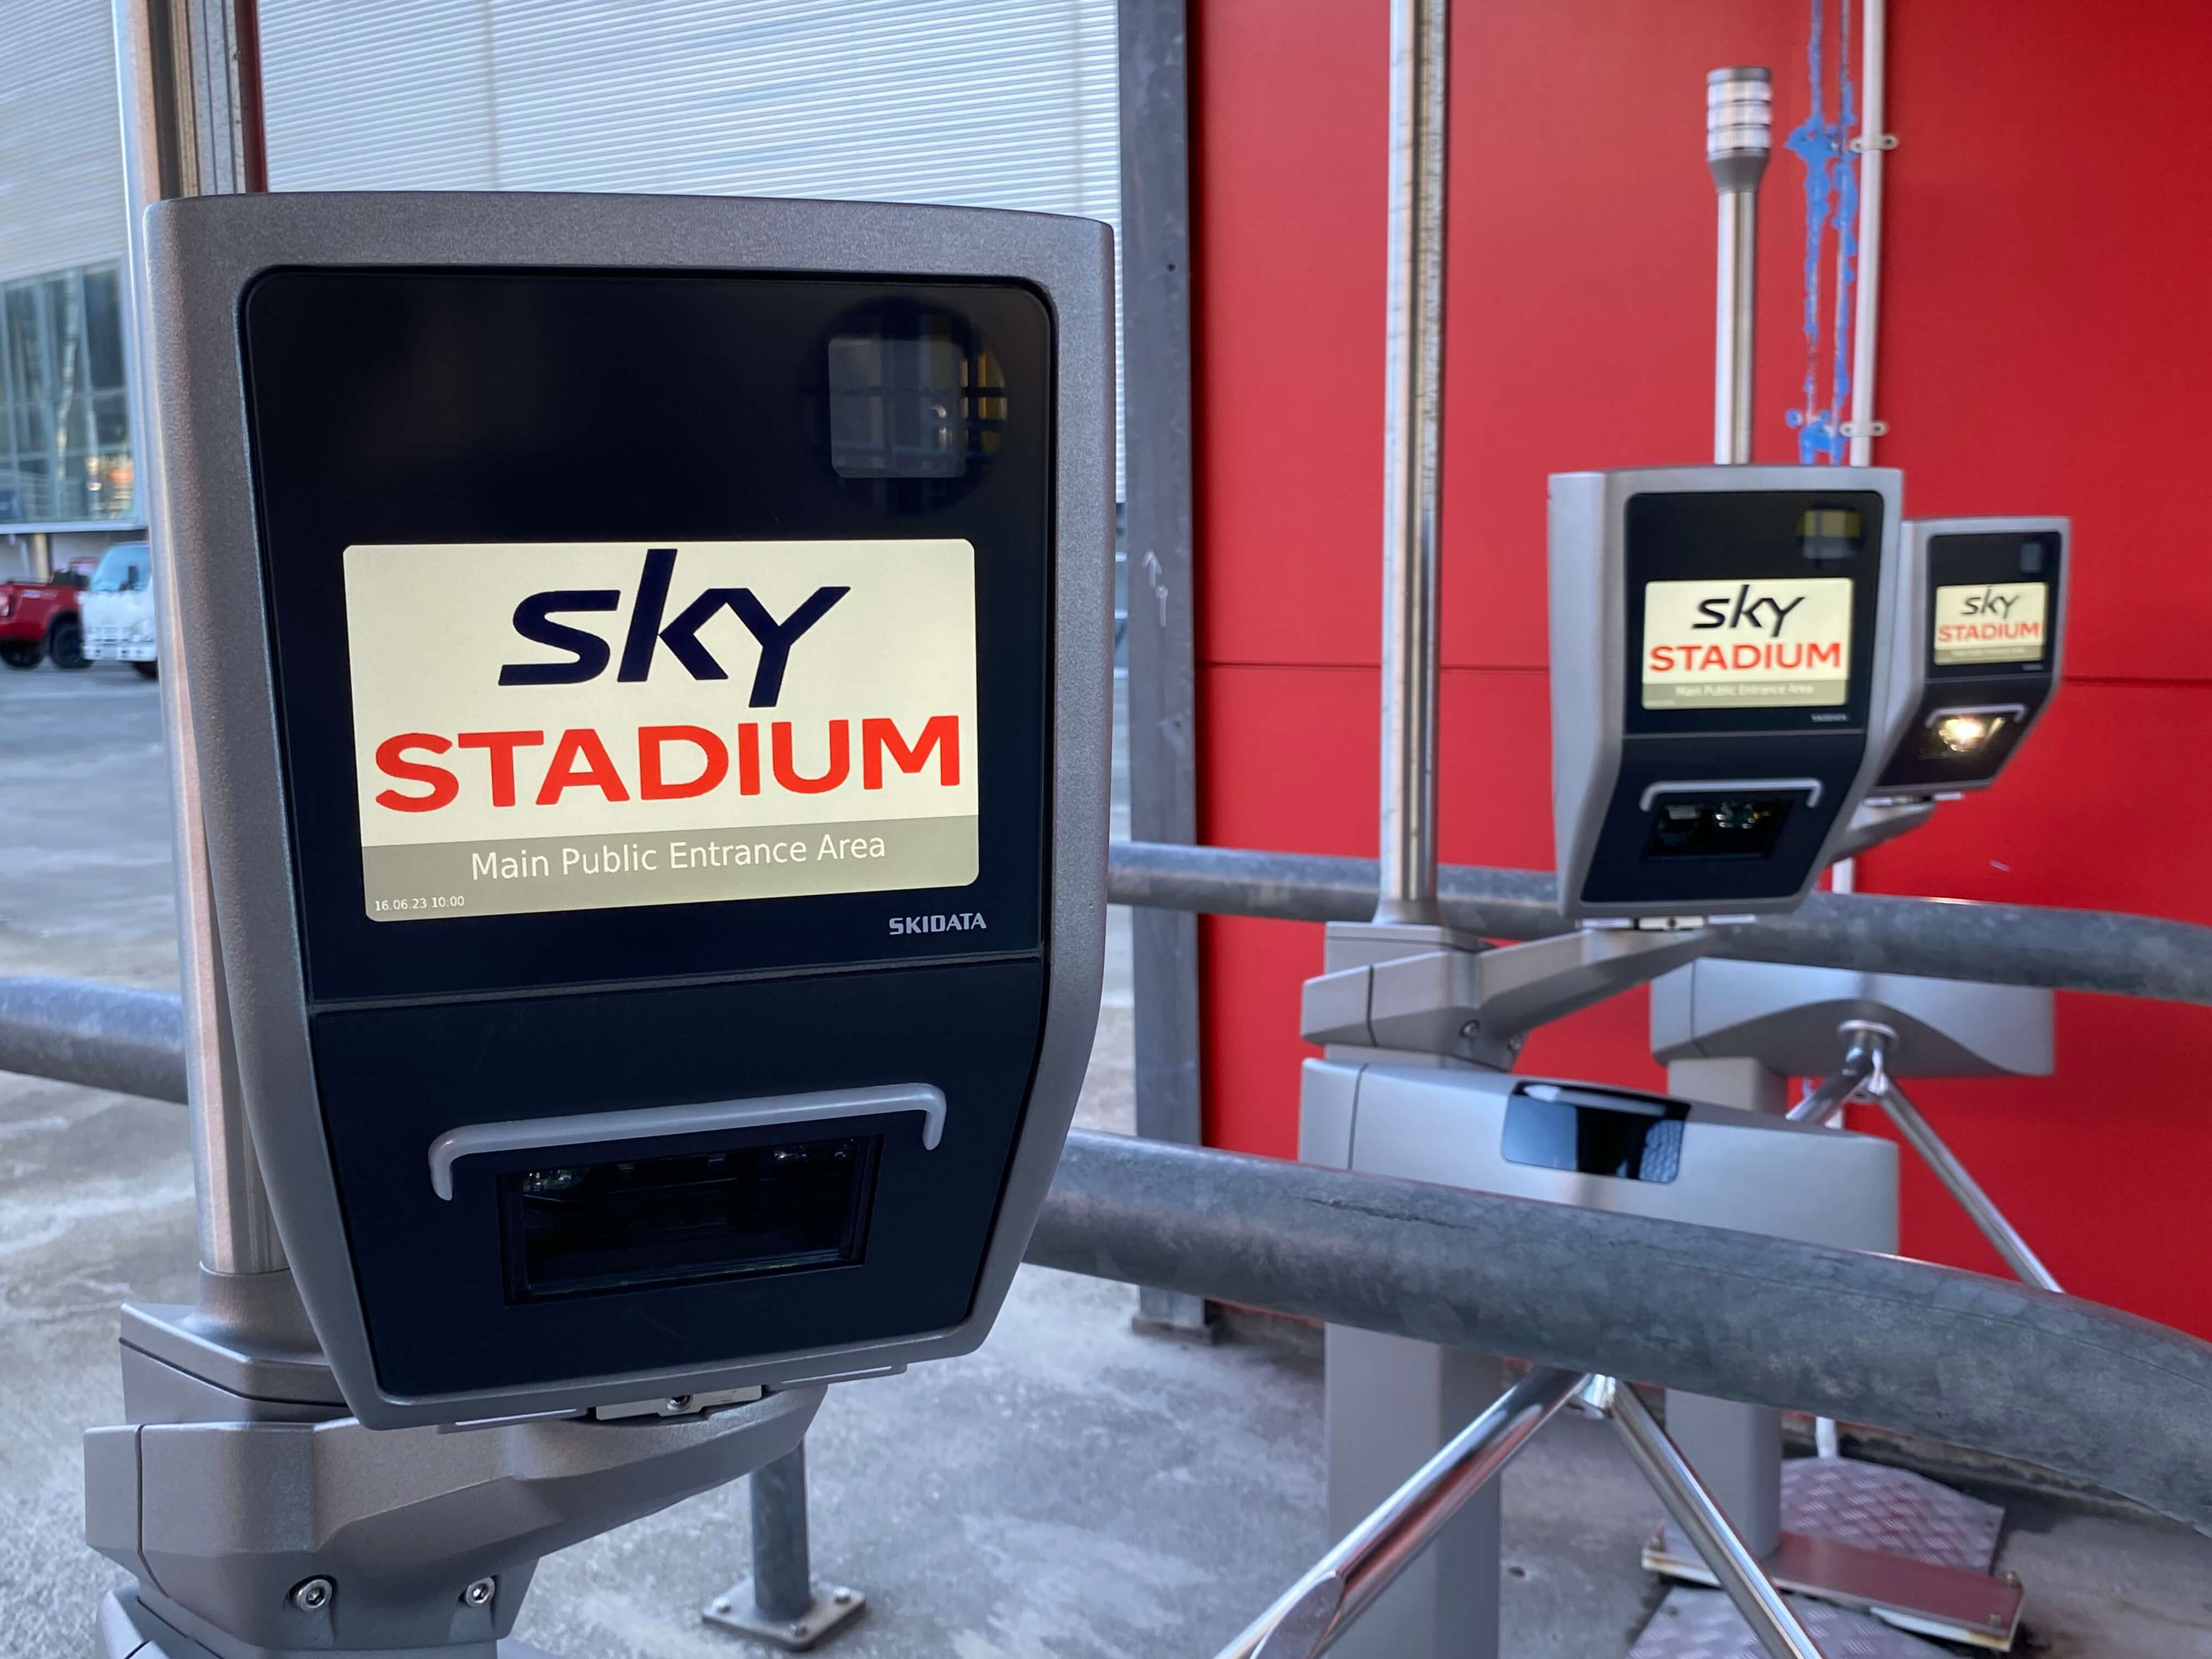 SKIDATA Access Solution for Arenas and Stadiums